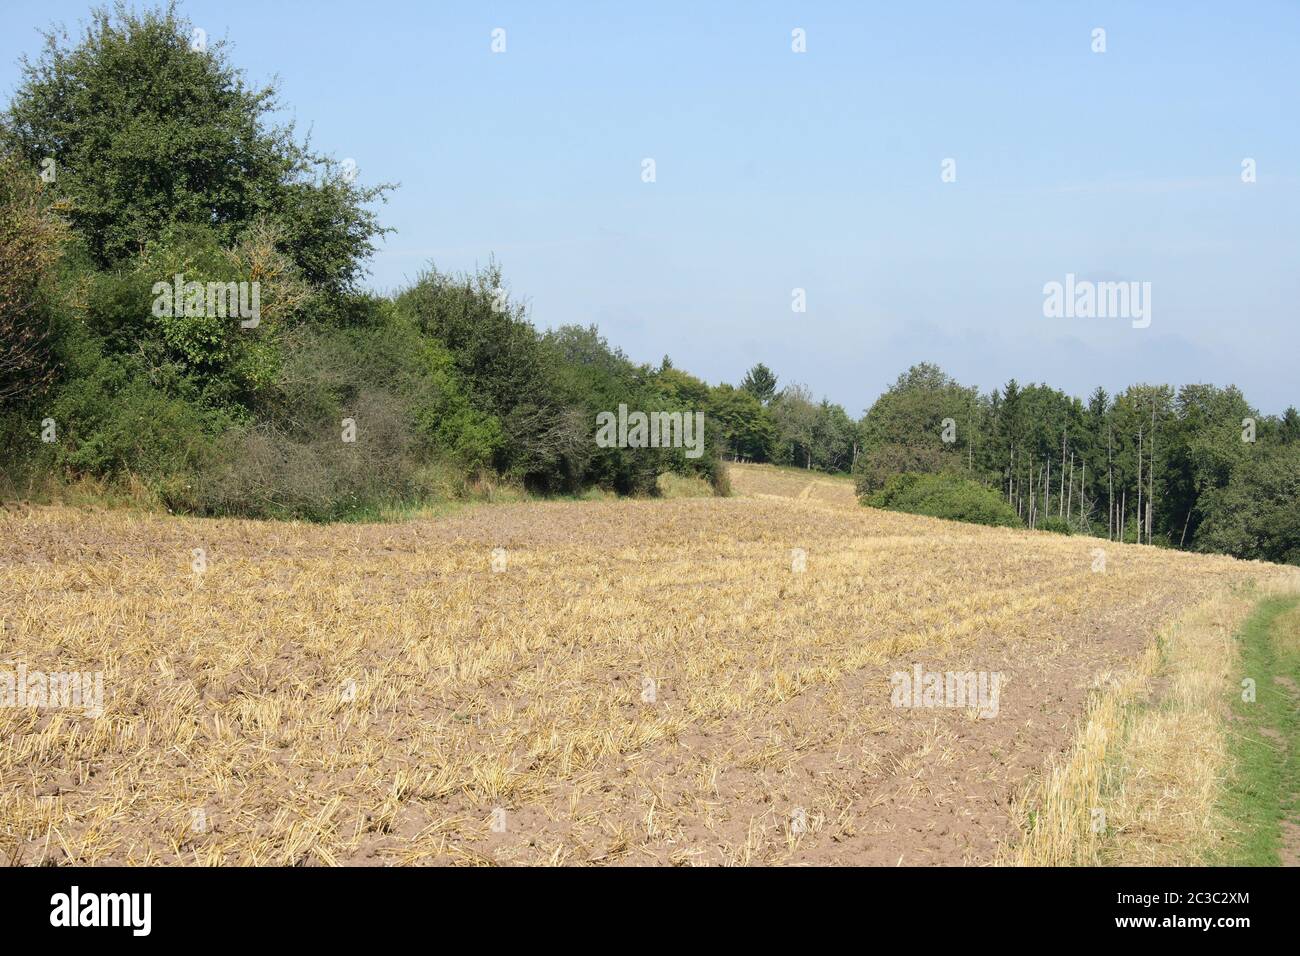 Harvested grain field with a forest in the background Stock Photo